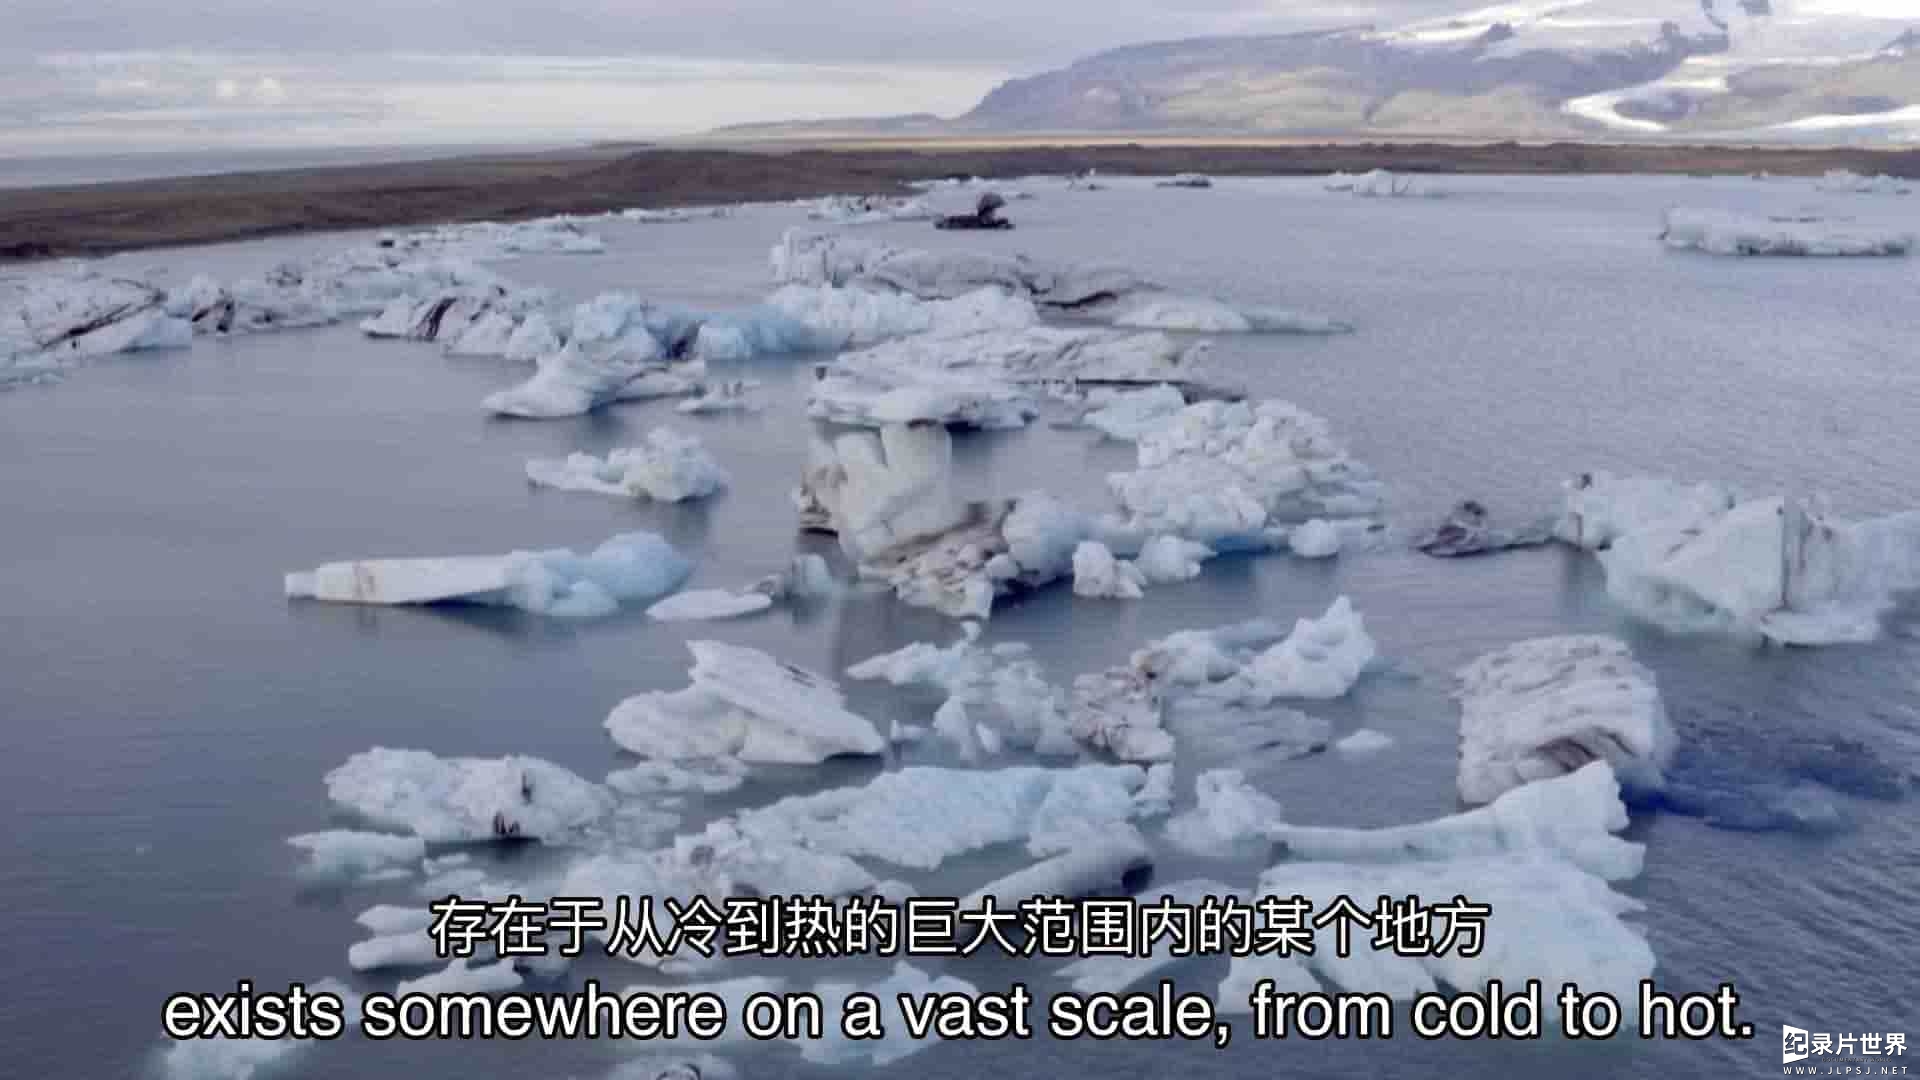 BBC纪录片《从冰到火：令人难以置信的温度科学 From Ice to Fire: The Incredible Science of Temperature 2018》全3集